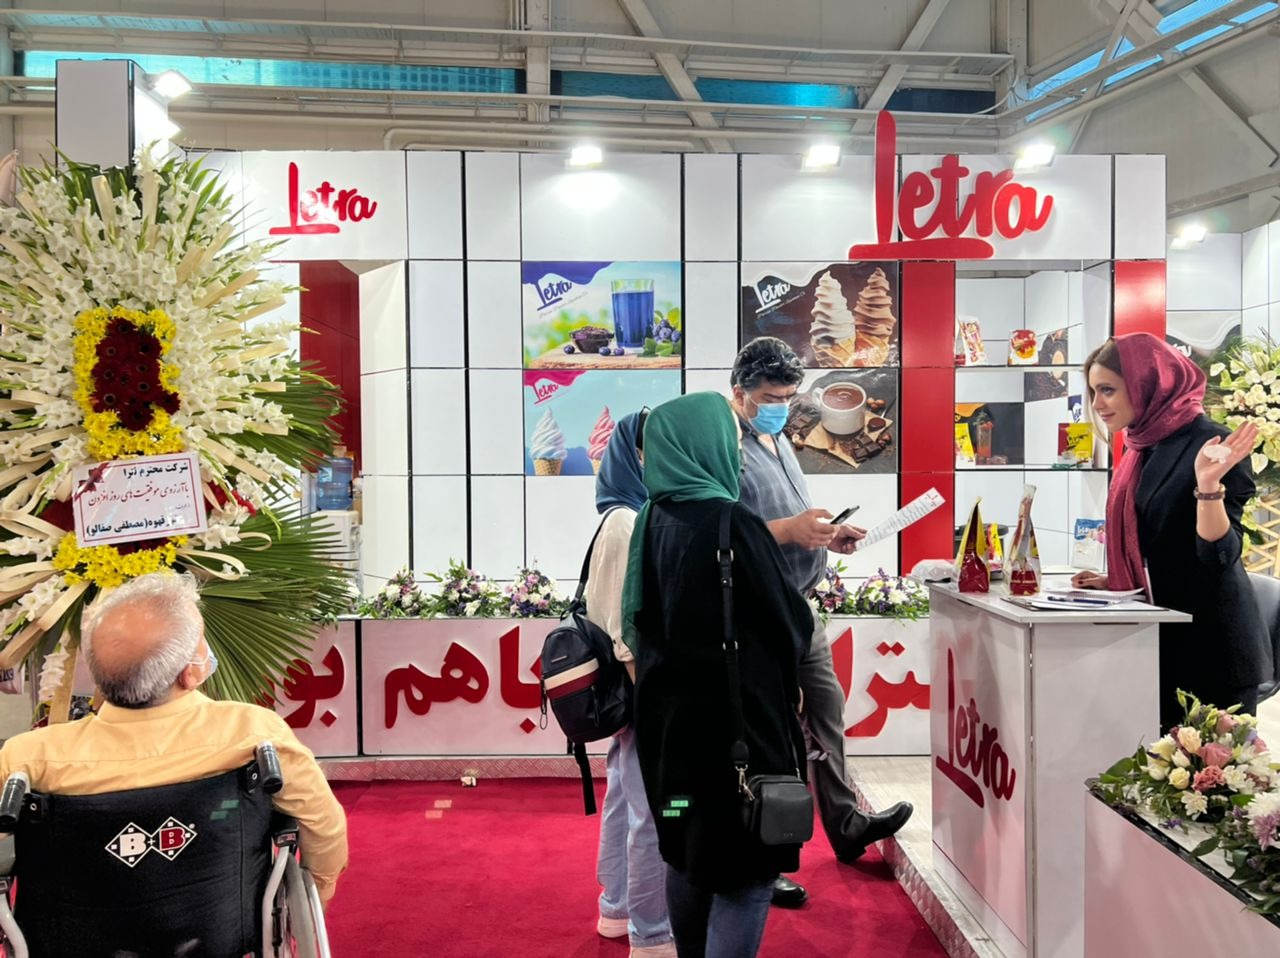 image 35 - The 11th International Drinks, Tea, Coffee & Related Industries Exhibition 2024 in Iran/Tehran